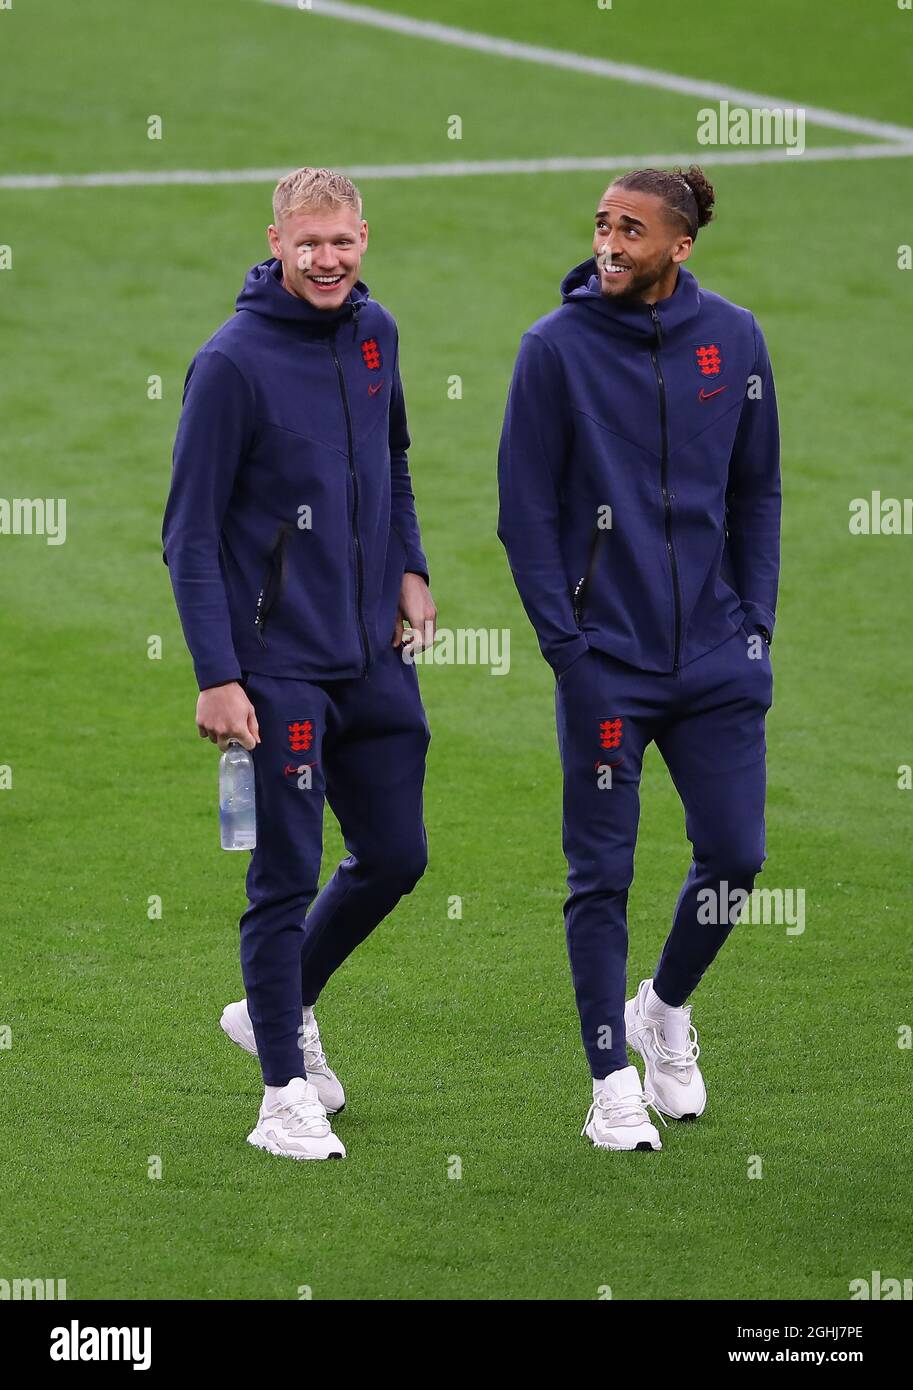 London, England, 18th June 2021.  Aaron Ramsdale and Dominic Calvert-Lewin of England on a pitch walk before the UEFA European Championships match at Wembley Stadium, London. Picture credit should read: David Klein / Sportimage via PA Images Stock Photo